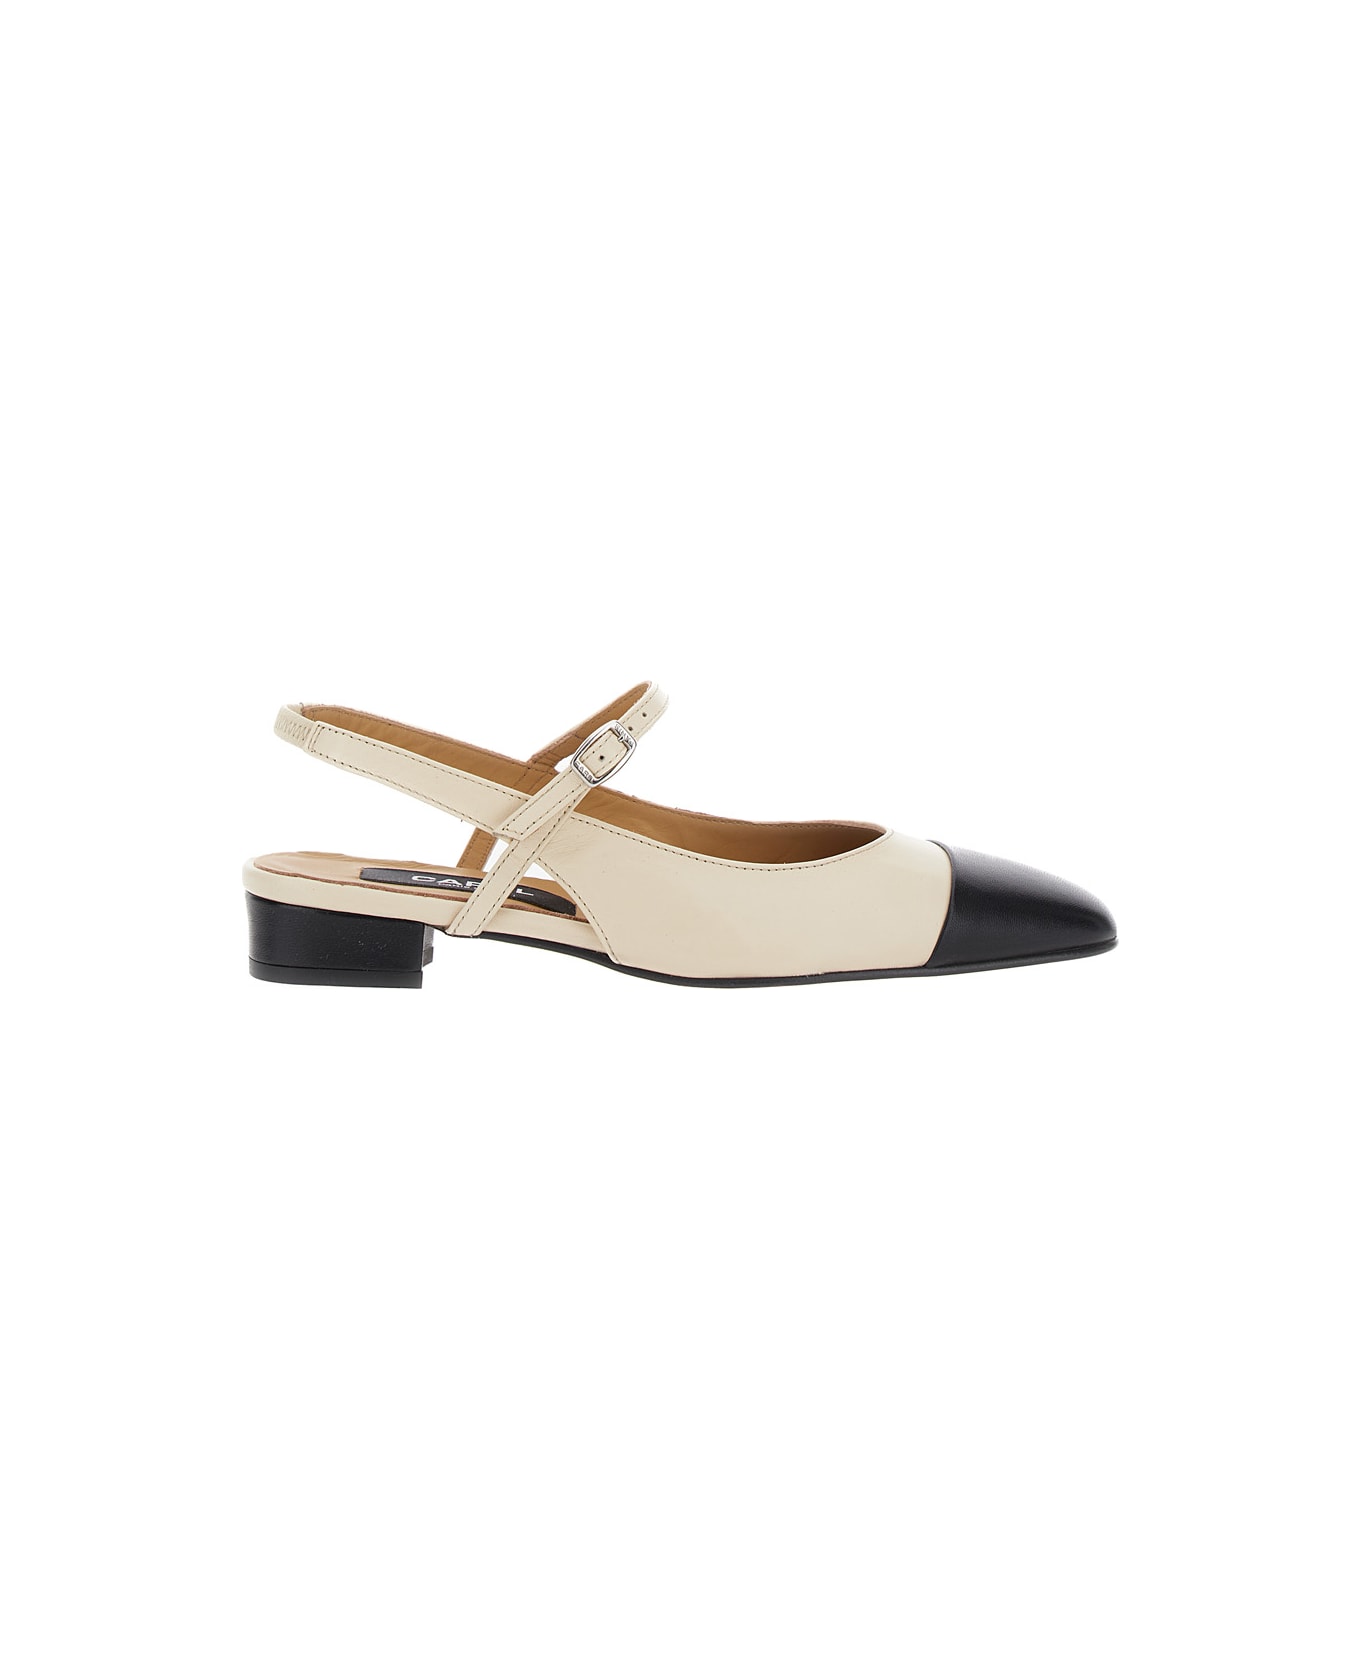 Carel White Slingback Pumps With Contrasting Toe In Leather Woman - Beige